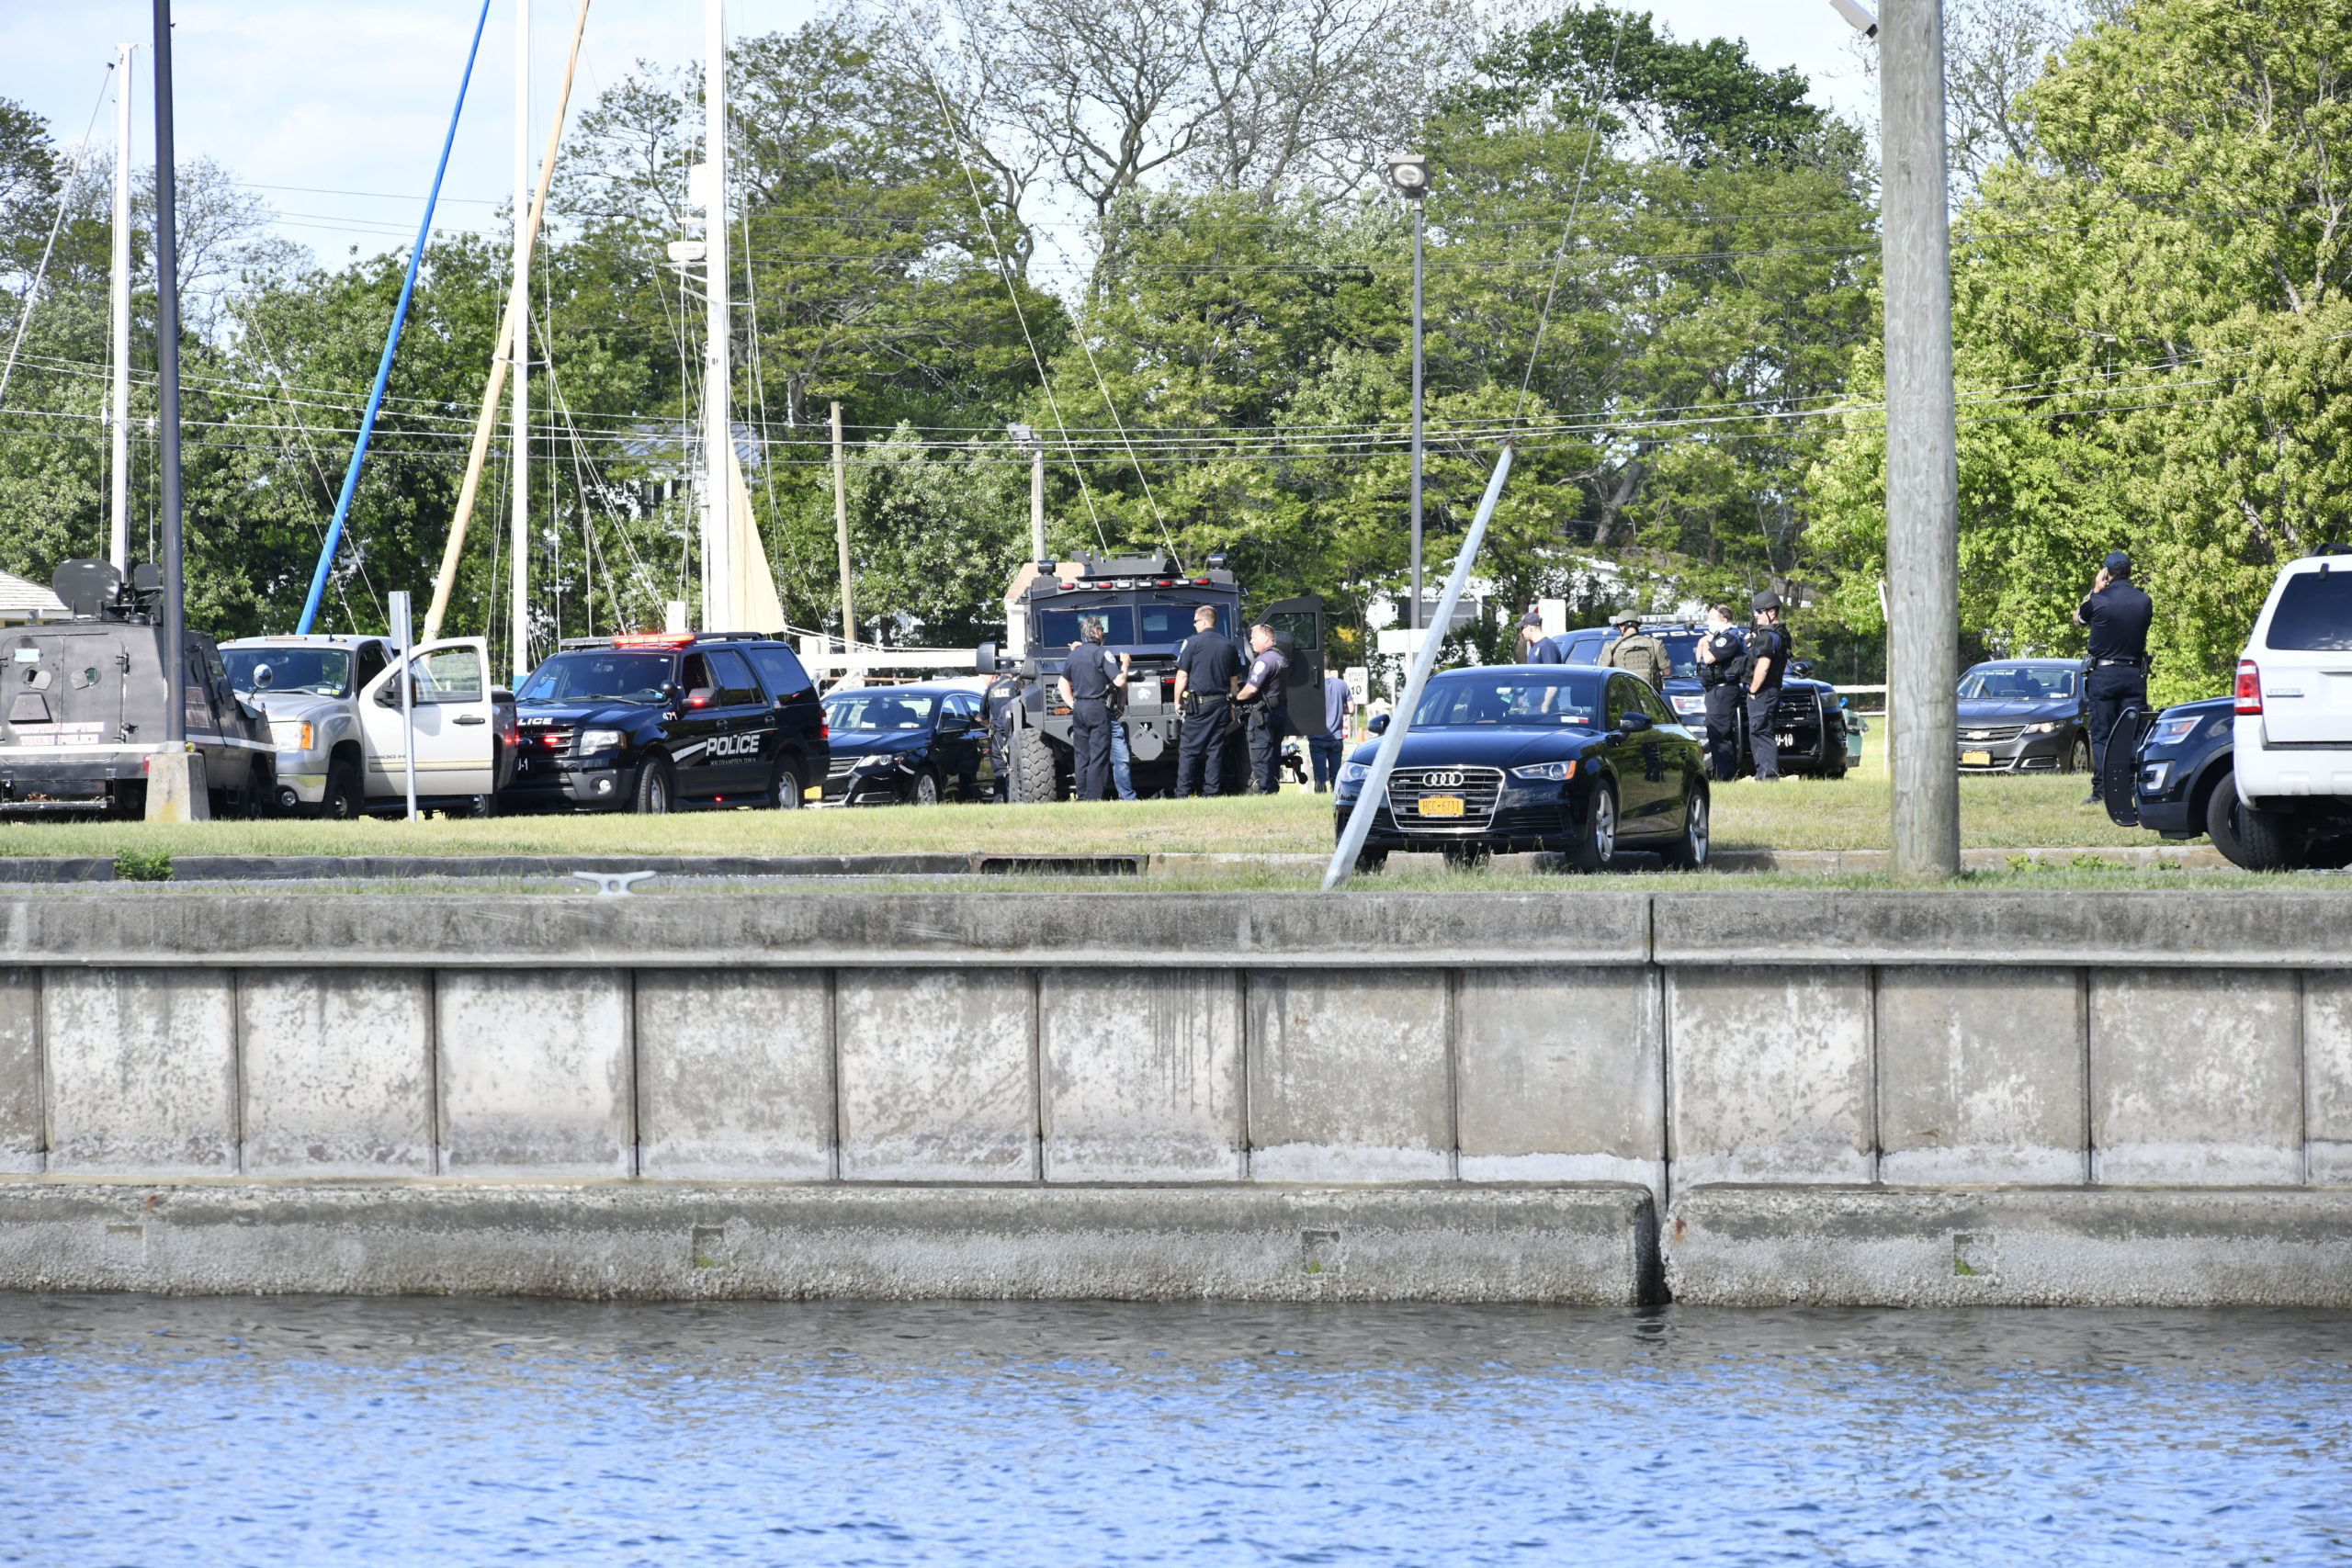 Law enforcement surround a subject with a handgun in the parking lot at  Meschutt Beach in Hampton Bays on Monday afternoon.   DANA SHAW